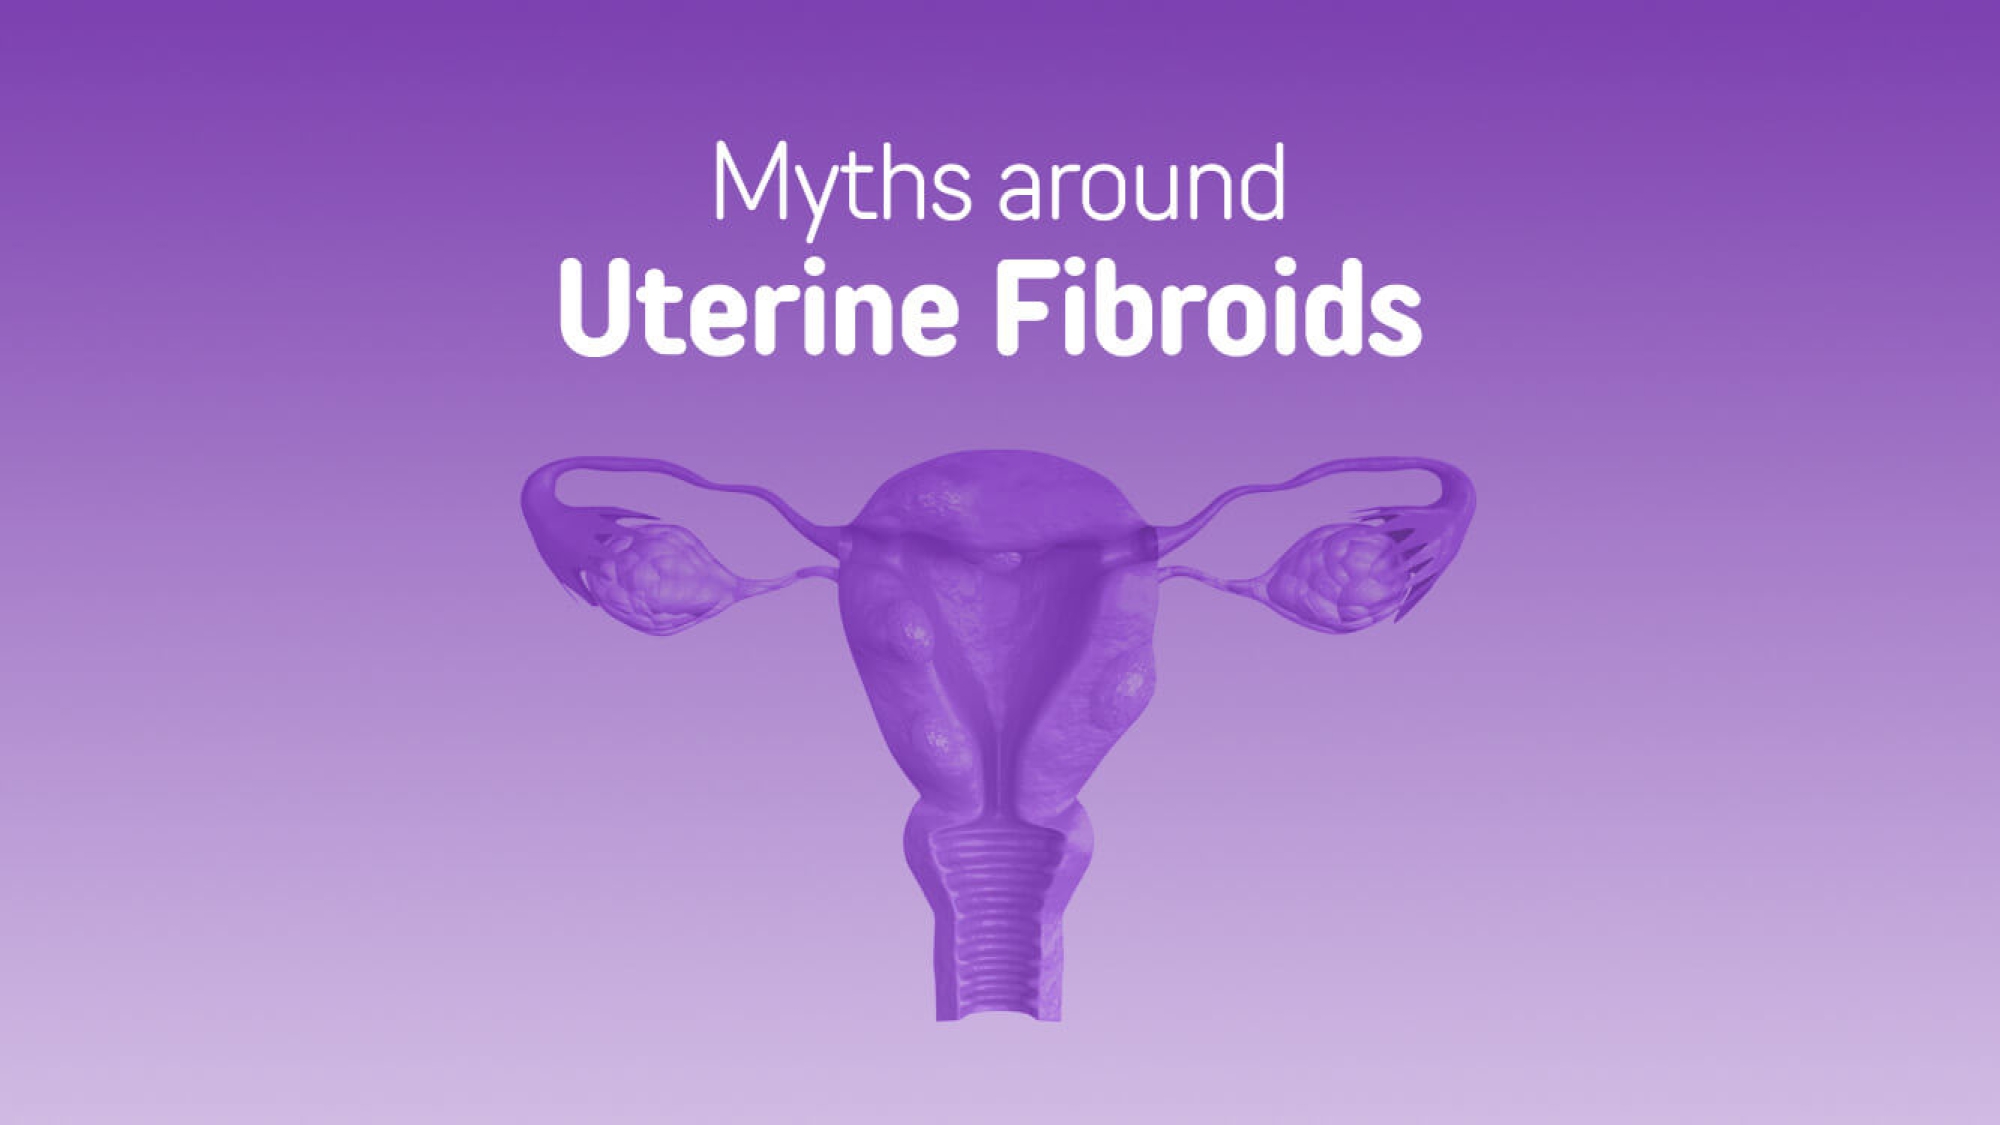 7-Myths-and-Facts-Around-Uterine-Fibroids-that-Every-Woman-Needs-to-Know-Dr-Manish-Banker